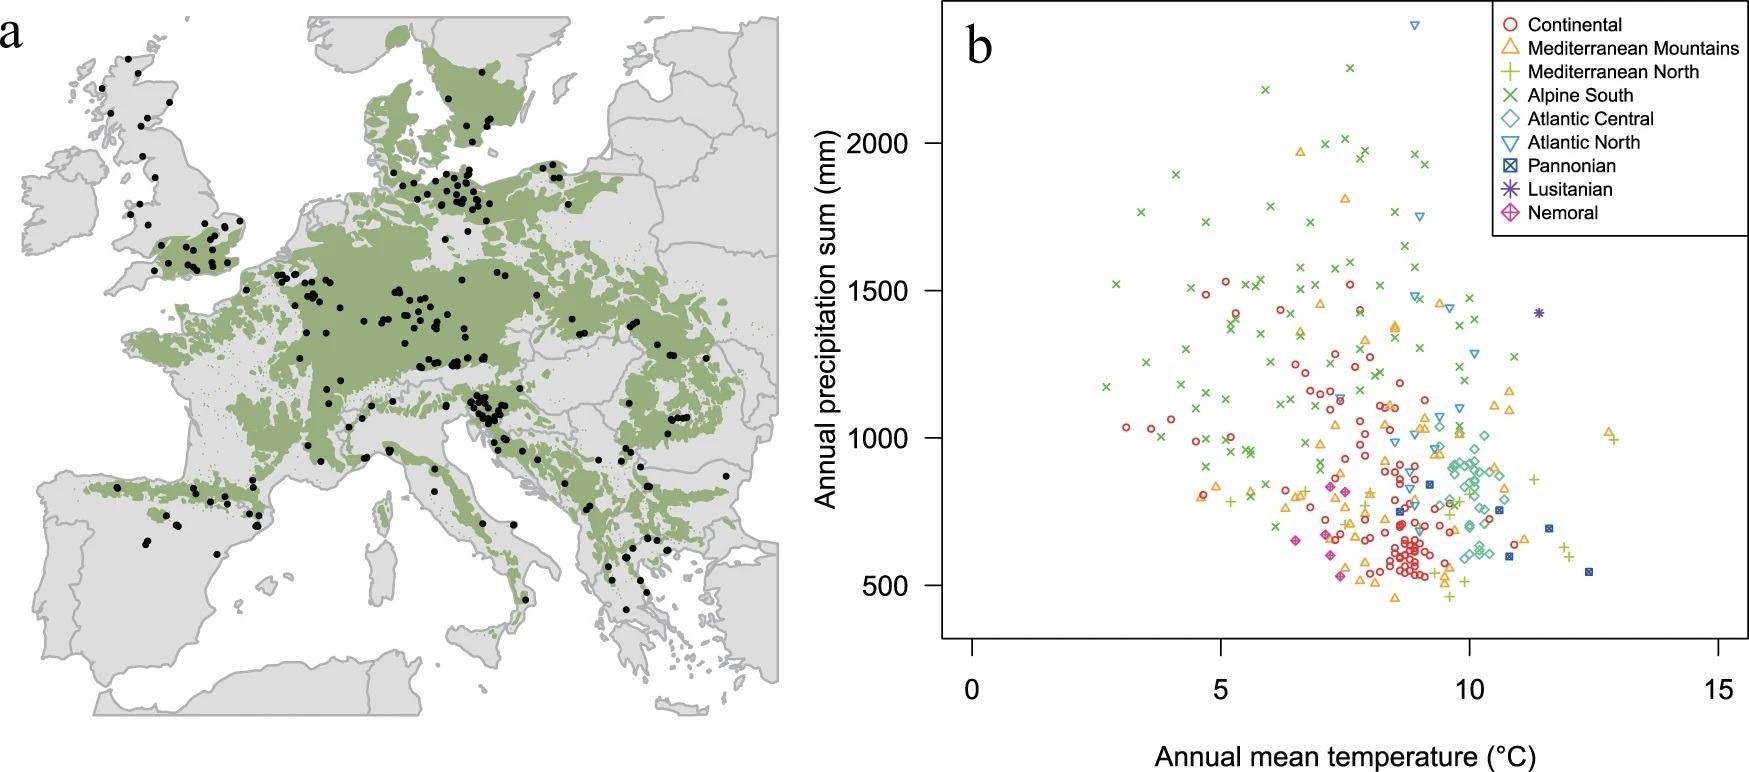 Spatial and climatic range of beech sites. A. Geographical distribution of the 324 study sites (black dots) in the natural distribution range of European beech (green area based on the EUFORGEN map. B. Climatic envelope of European beech sampling sites, considering annual temperature and precipitation. Sites are labeled according to the environmental zones detailed in Metzger et al.